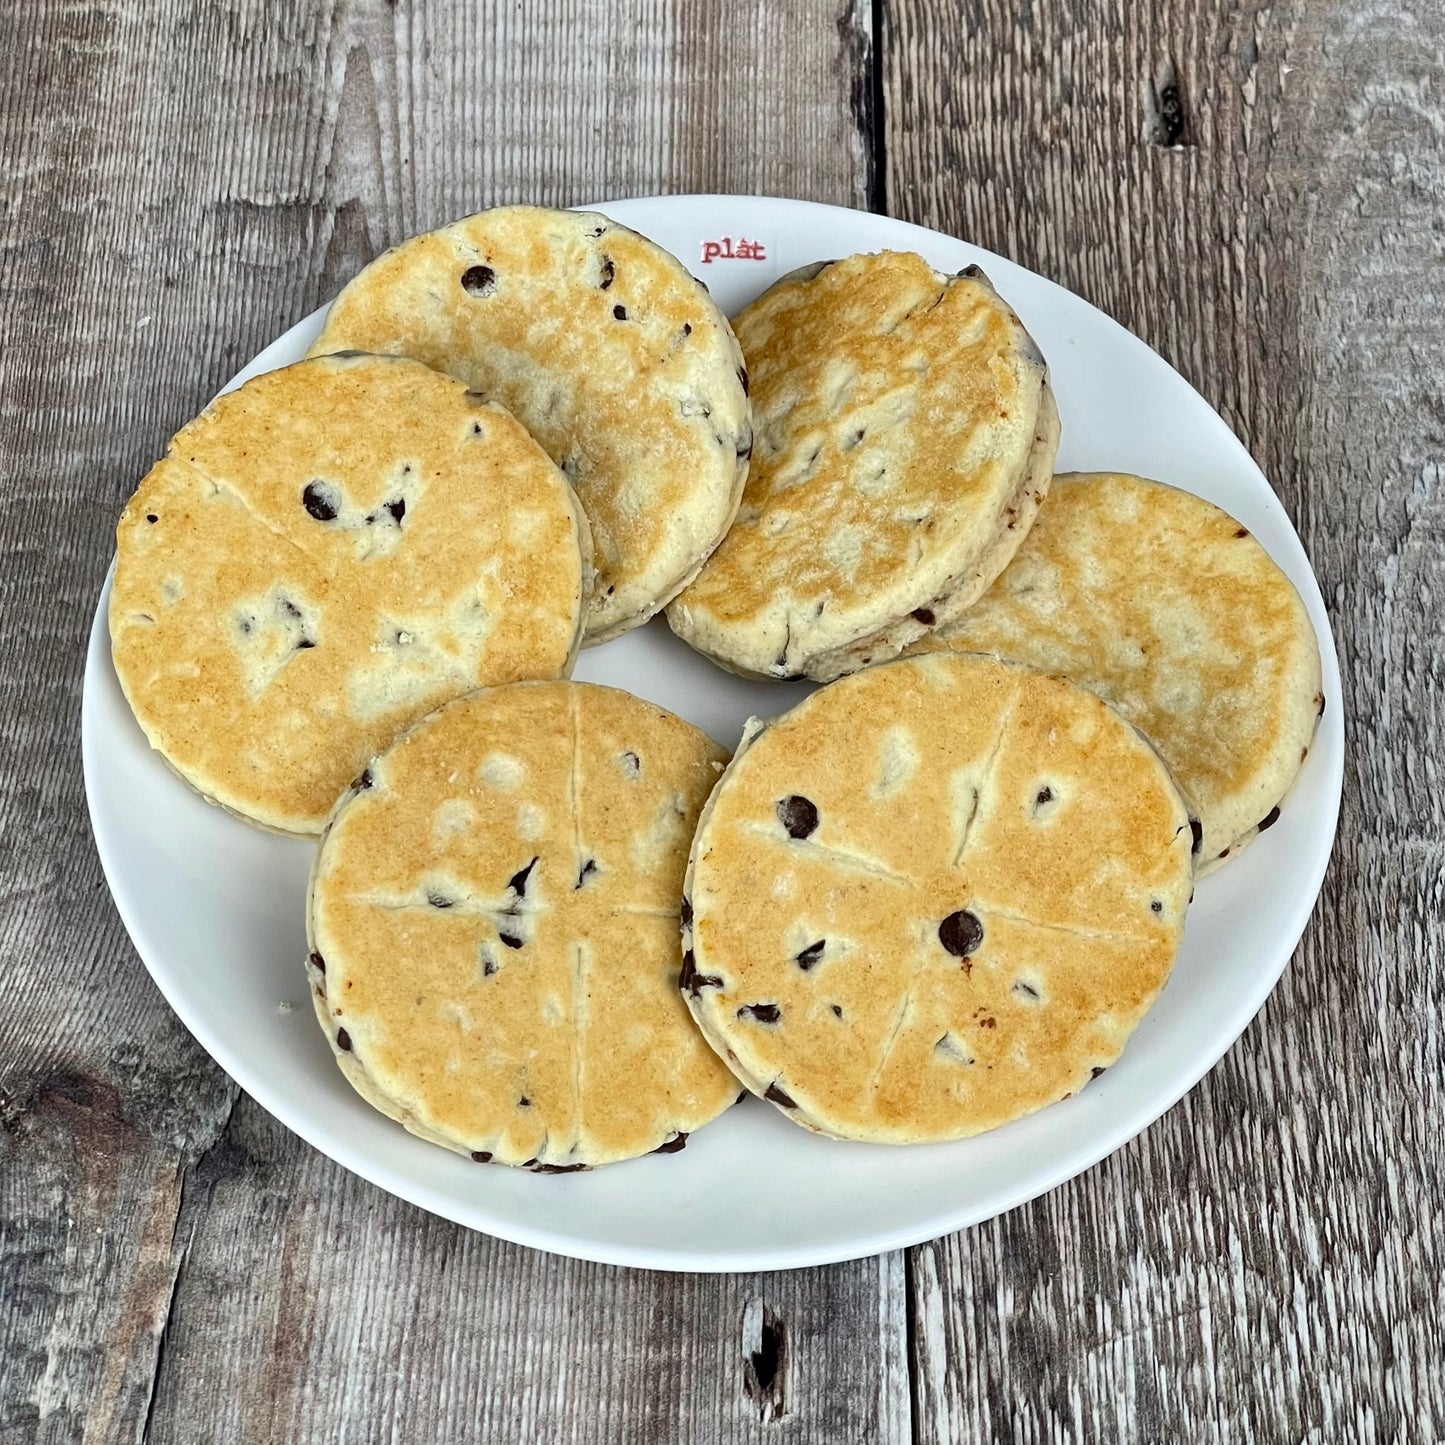 Pack of 6 Chocolate Chip Welshcakes